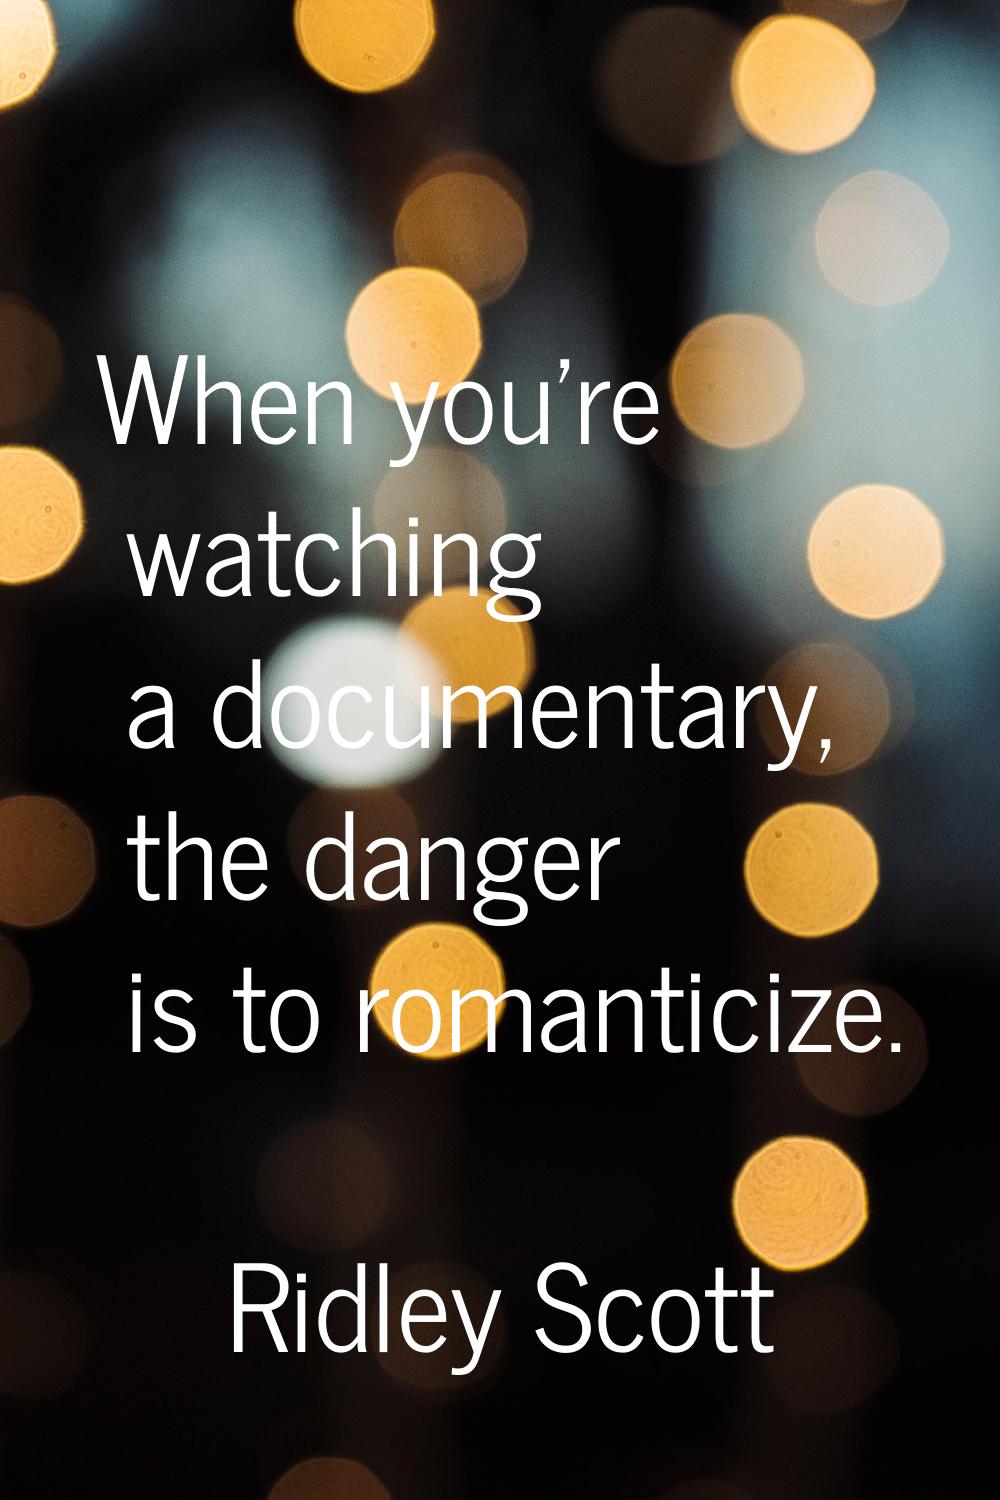 When you're watching a documentary, the danger is to romanticize.